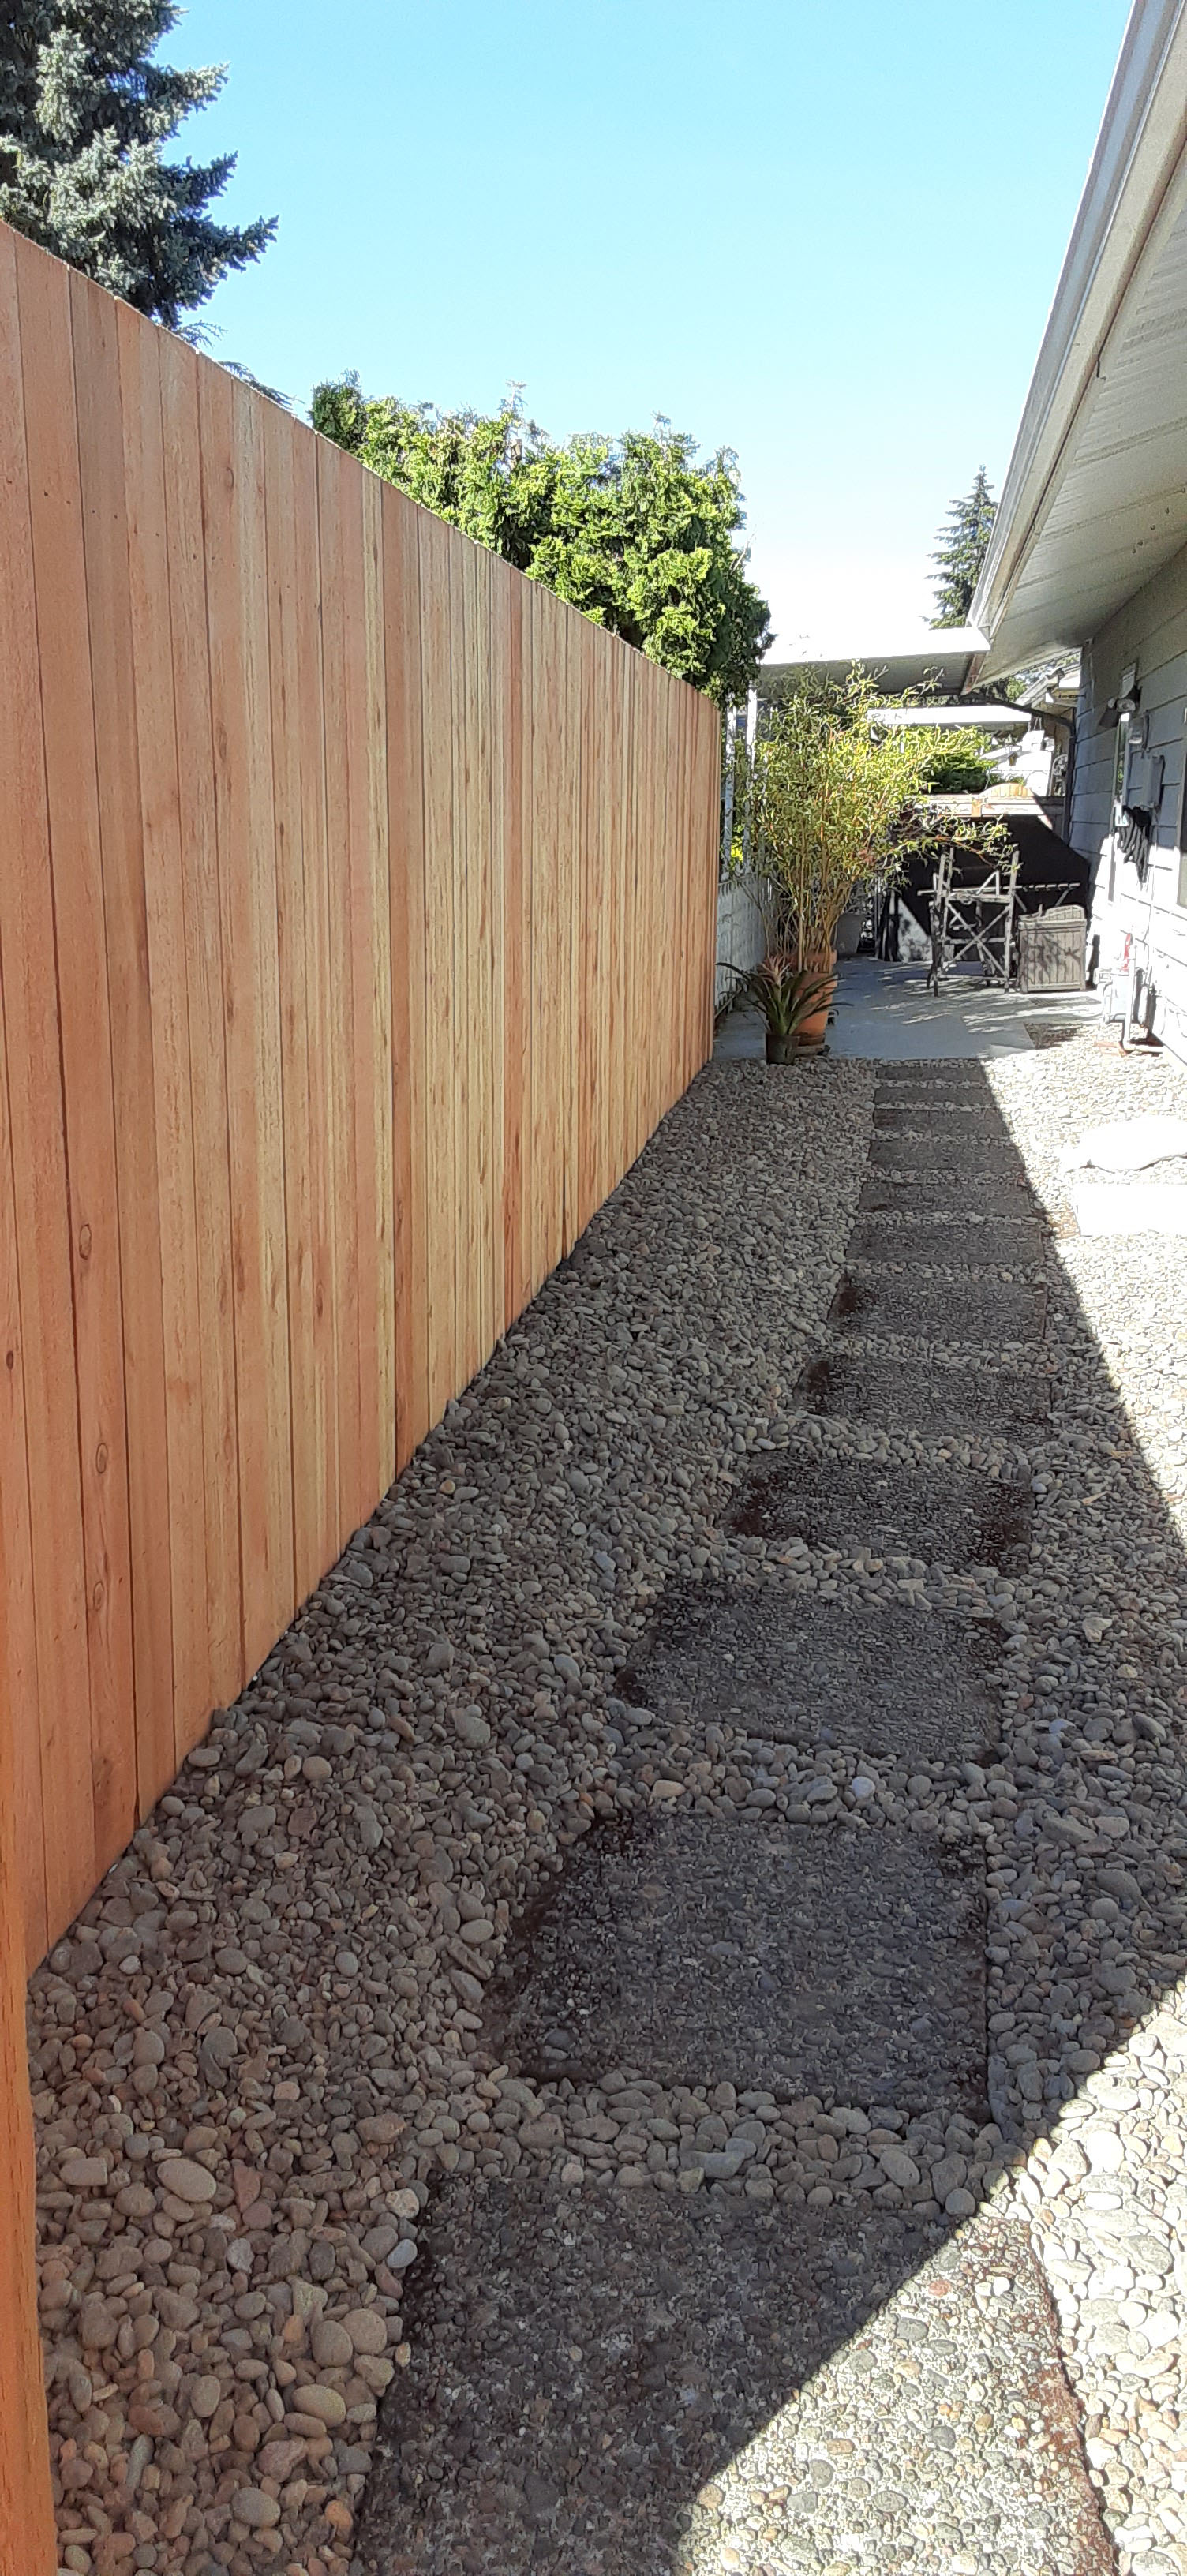 Brand new cement path with stone bed lining the entire side of the house